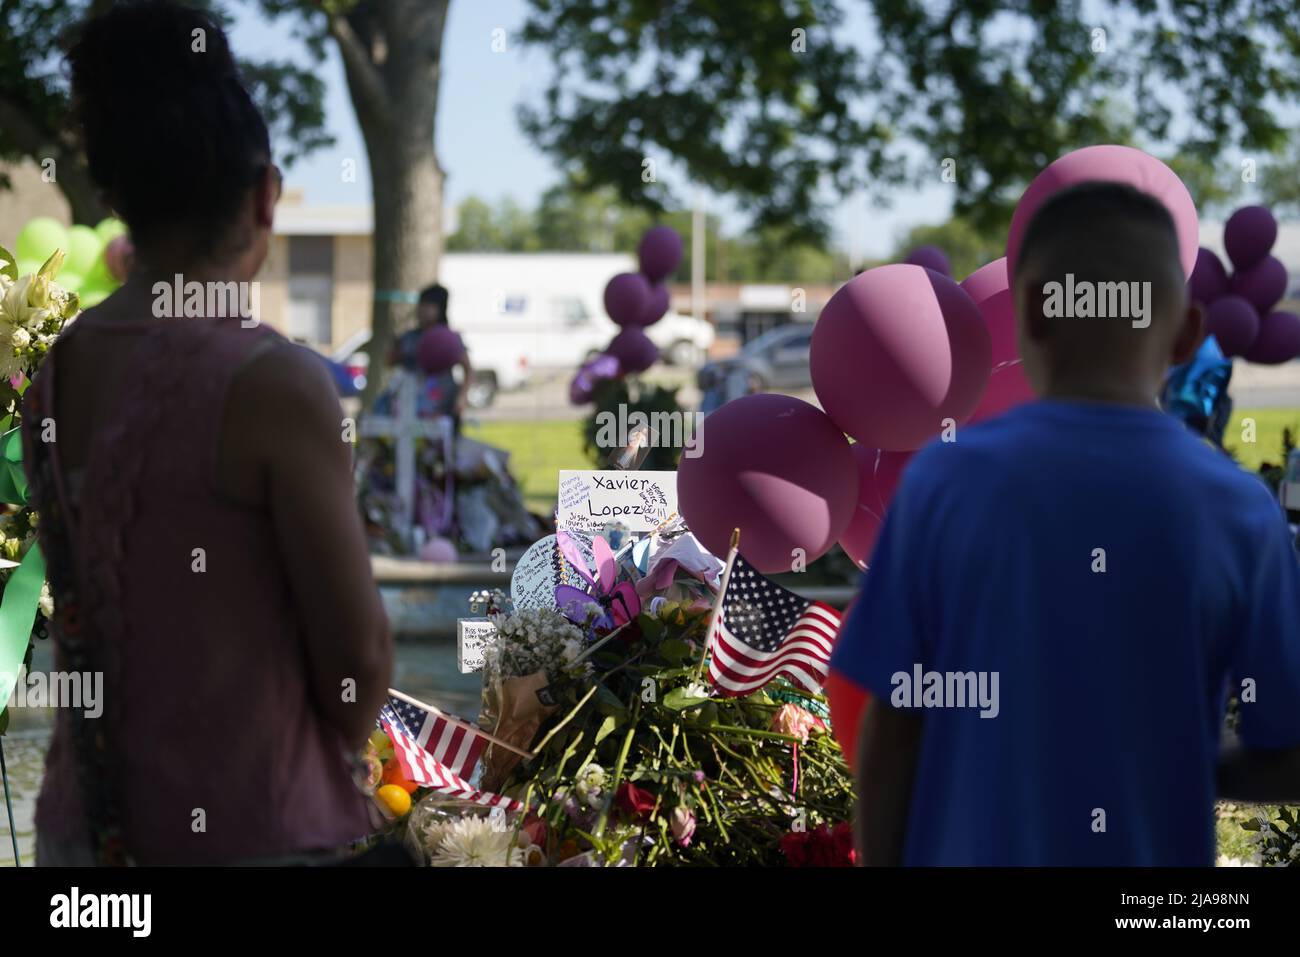 Uvalde, USA. 28th May, 2022. People mourn for victims of a school mass shooting at Town Square in Uvalde, Texas, the United States, May 28, 2022. At least 19 children and two adults were killed in a shooting at Robb Elementary School in the town of Uvalde, Texas, on Tuesday. Credit: Wu Xiaoling/Xinhua/Alamy Live News Stock Photo